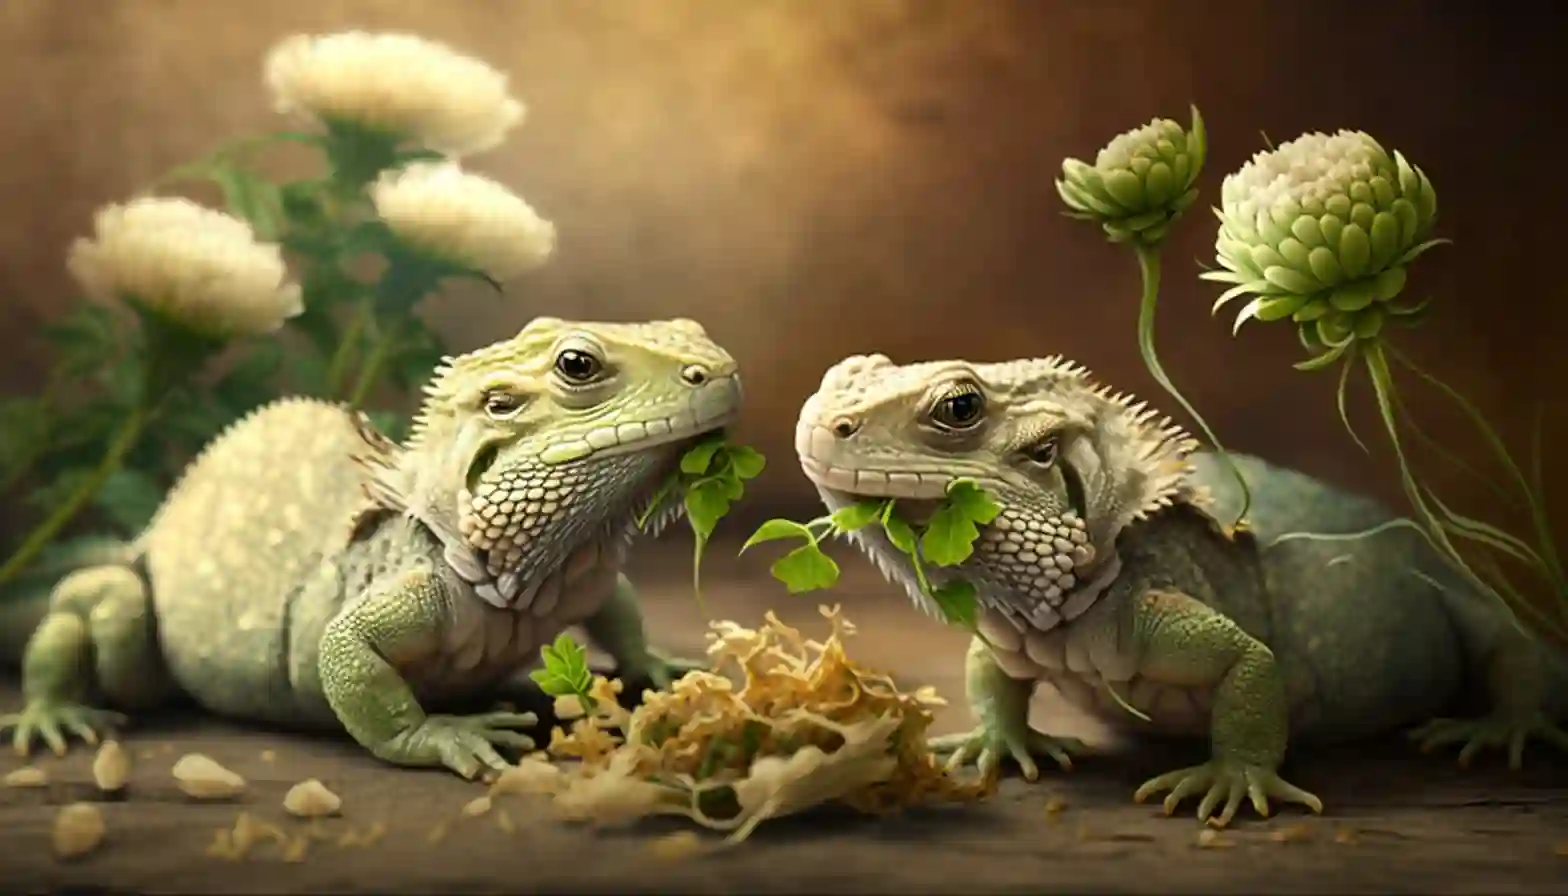 Can Bearded Dragons Eat Clovers?